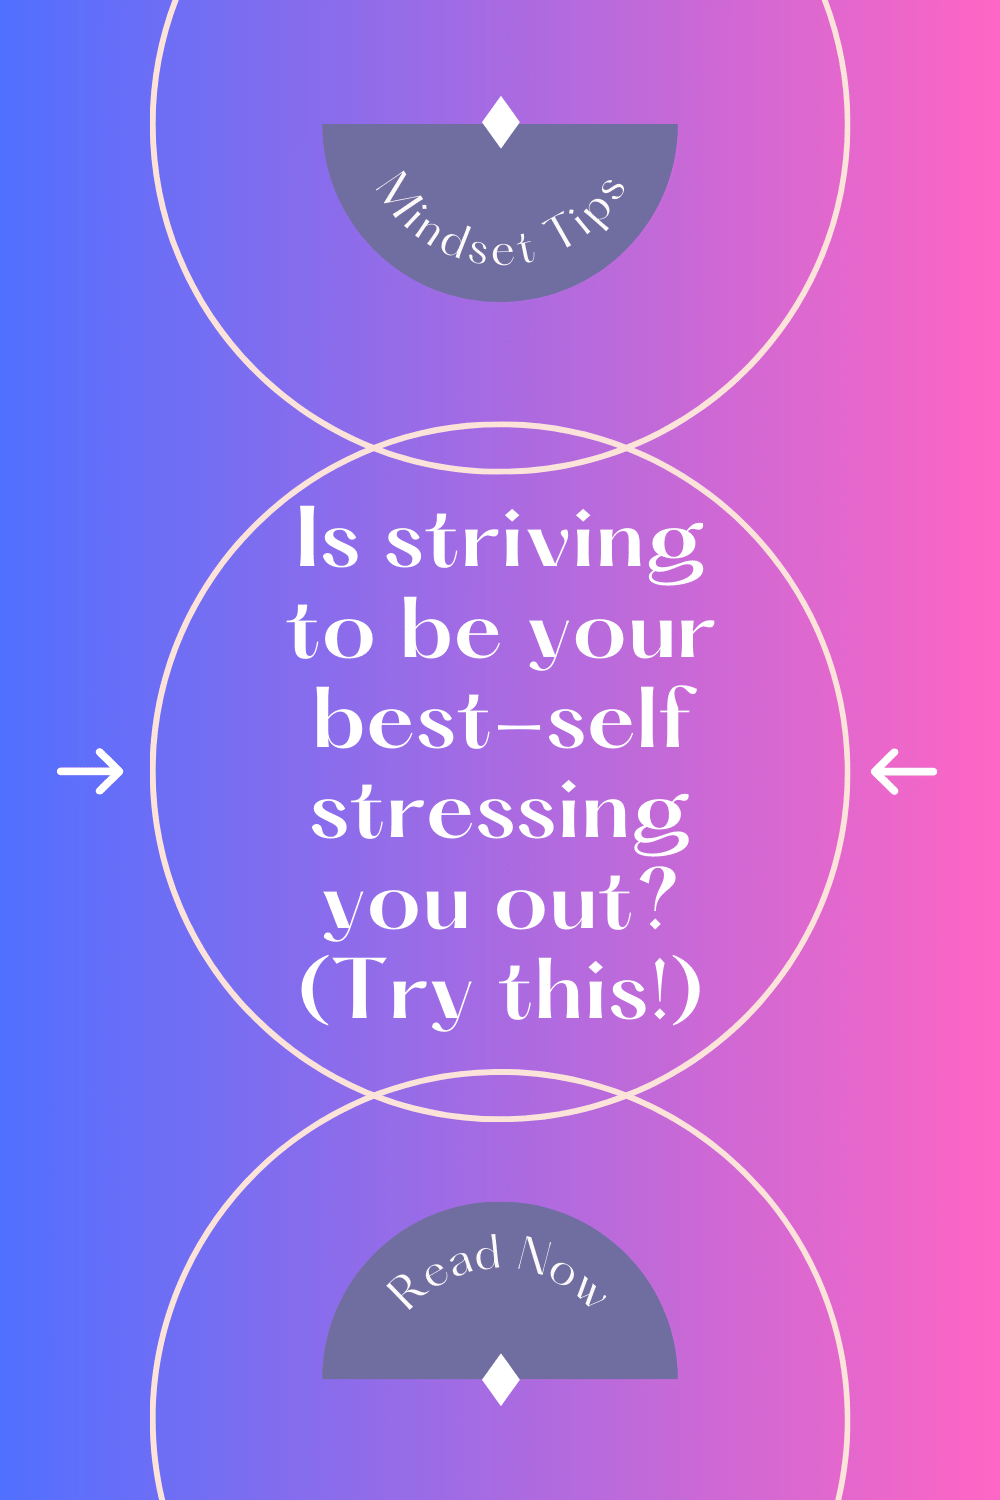 Trying to be your best self